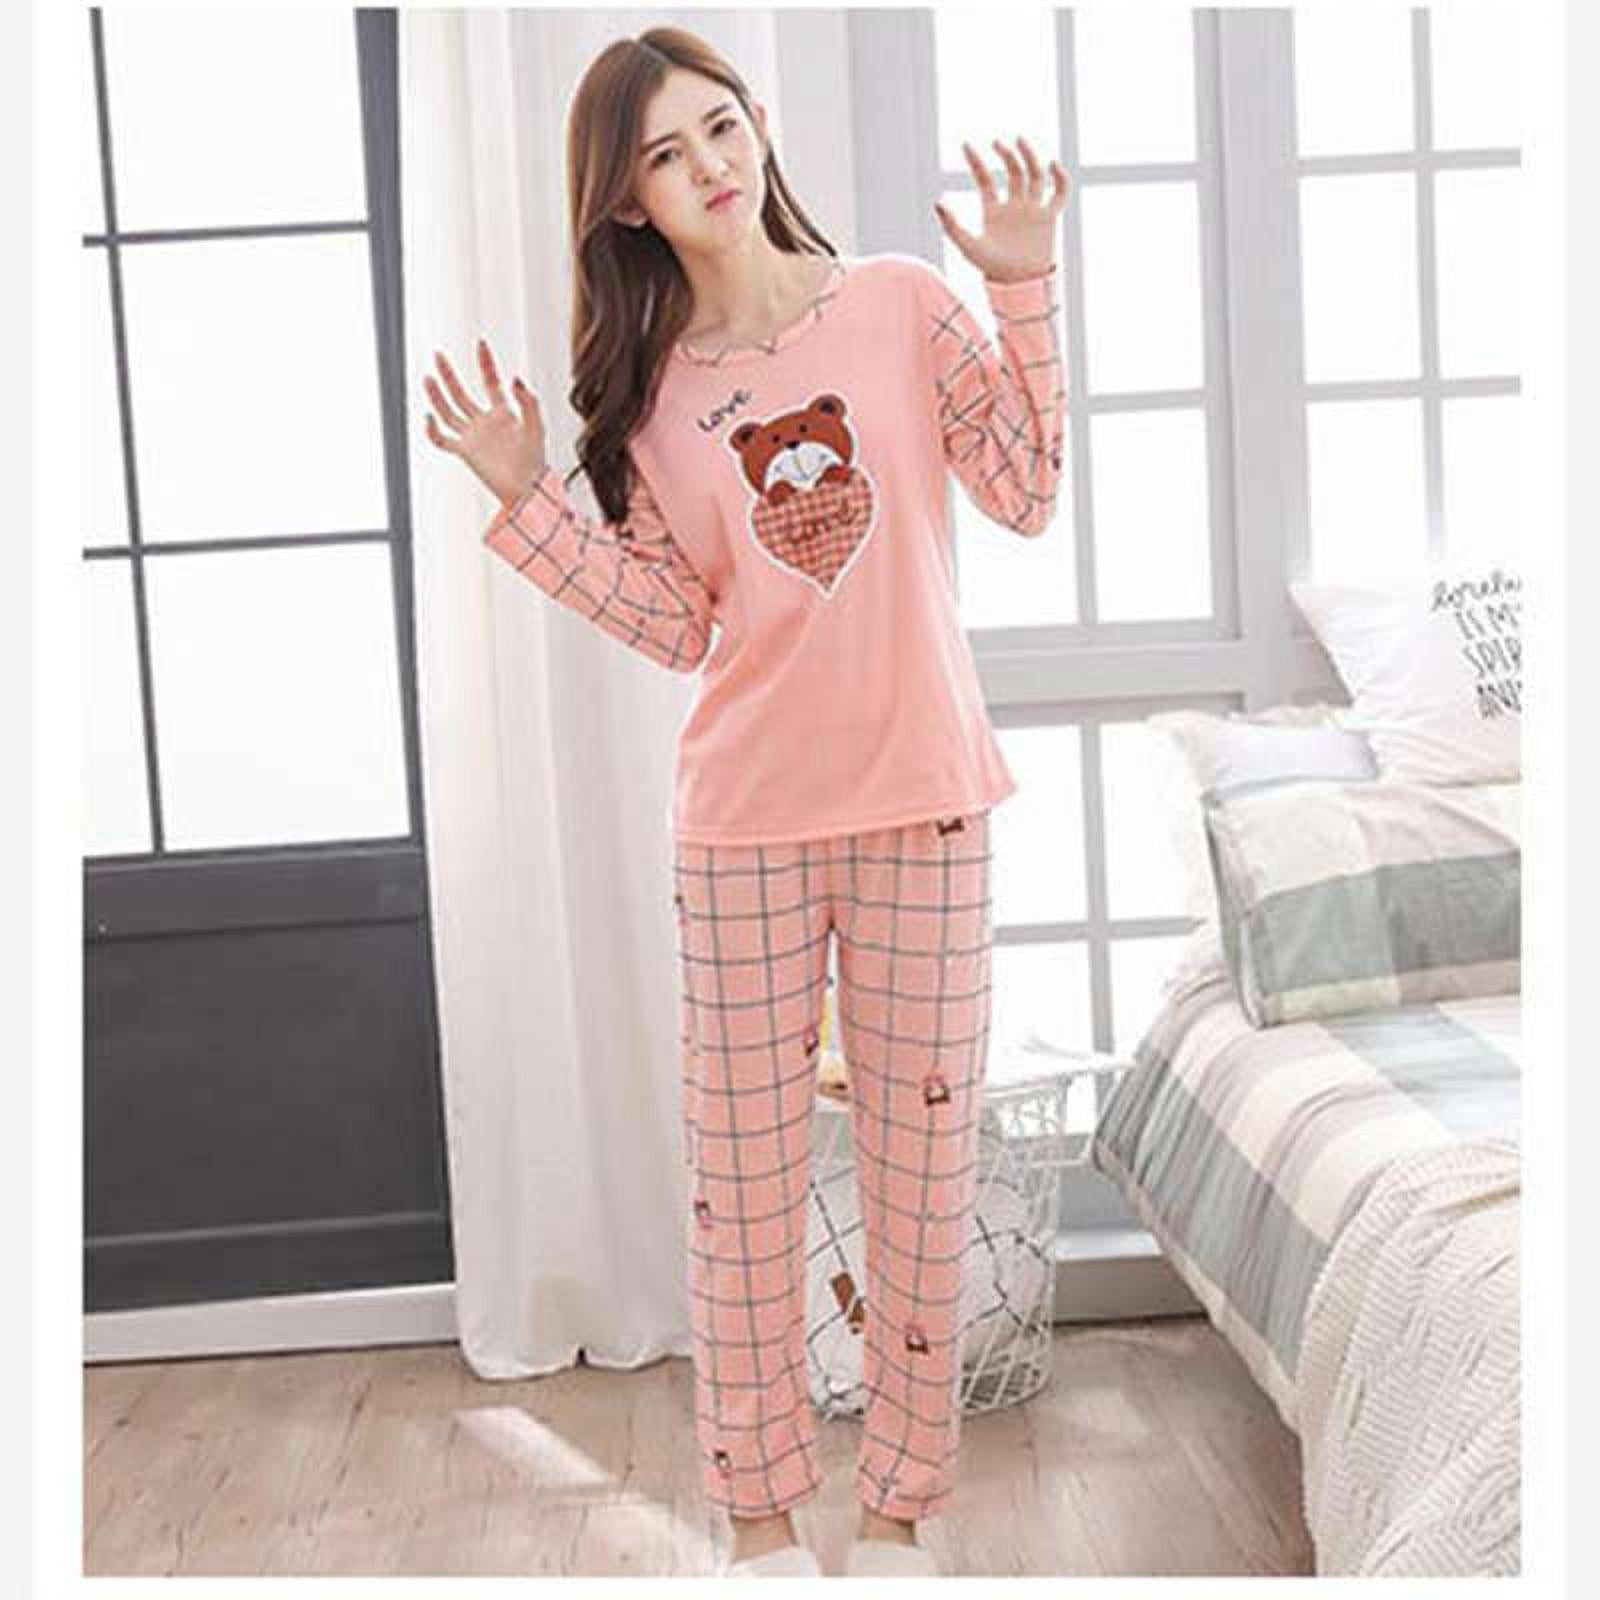 UNISEX ADULT JUSTICE OH DEER 2PC PAJAMA SET MULTIPLE SIZES NEW WITH TAGS IN BAG 